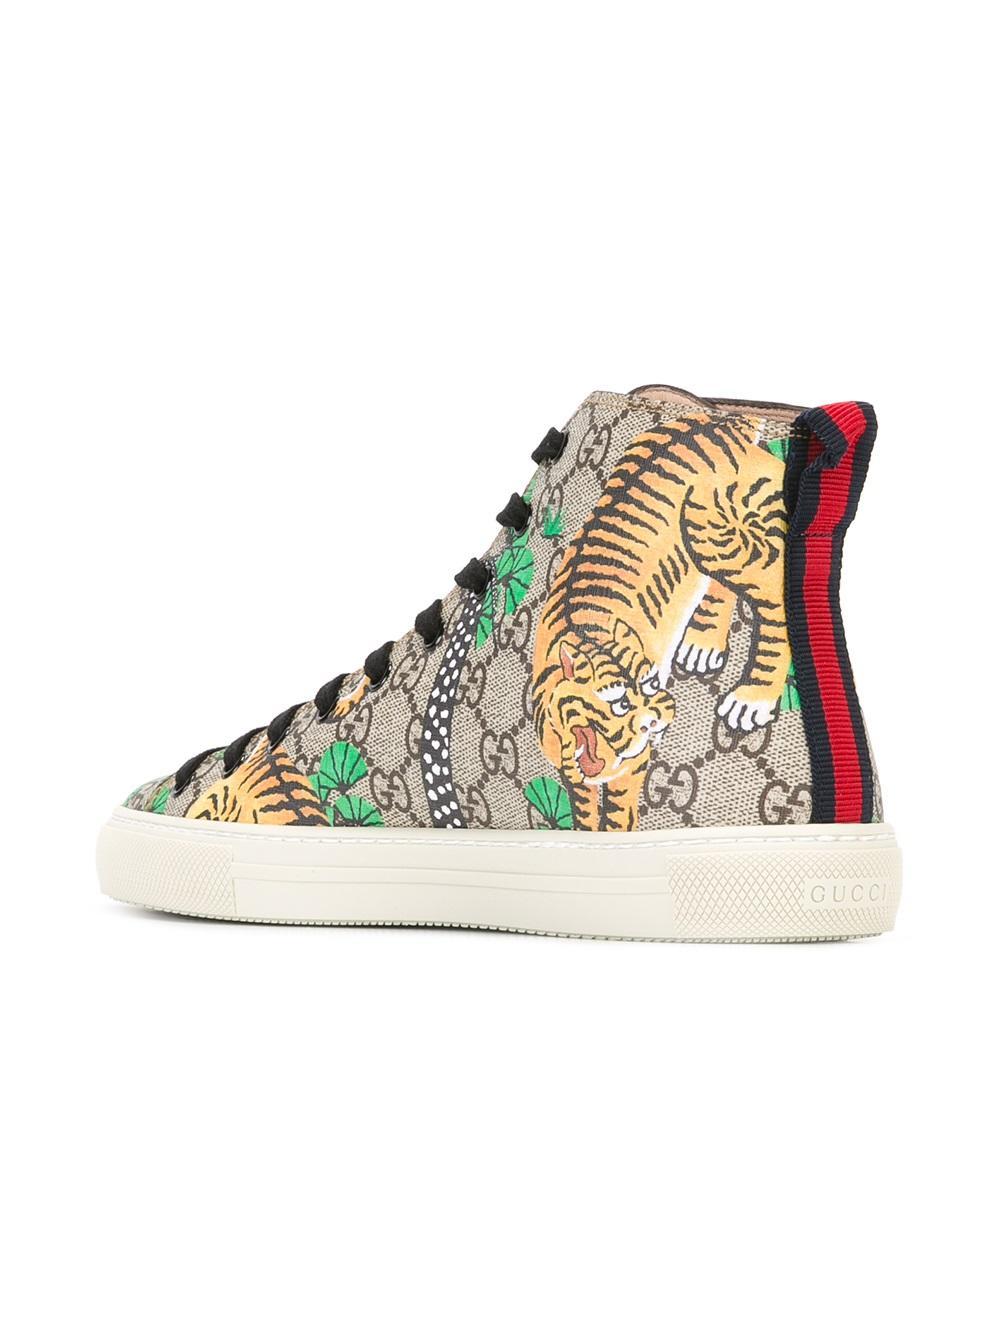 Gucci Leather 'bengal Tiger Gg Supreme' Hi-top Sneakers in Green - Lyst